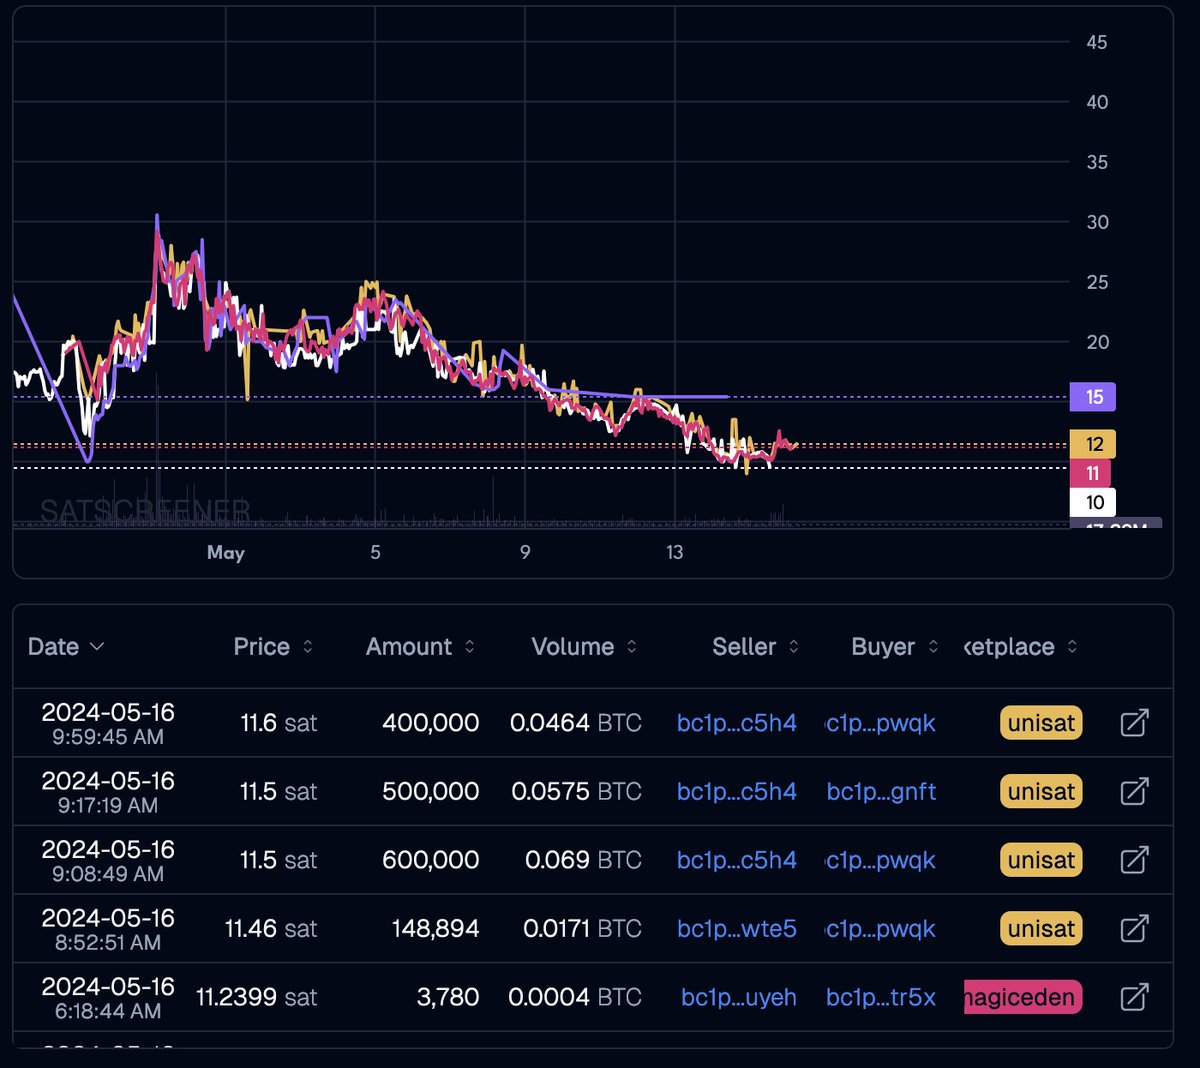 Runecoin is the ticker and it looks ready to go. Listed on OKX Major CEX and 1st rune on Binance is likely  #rsic #runecoin